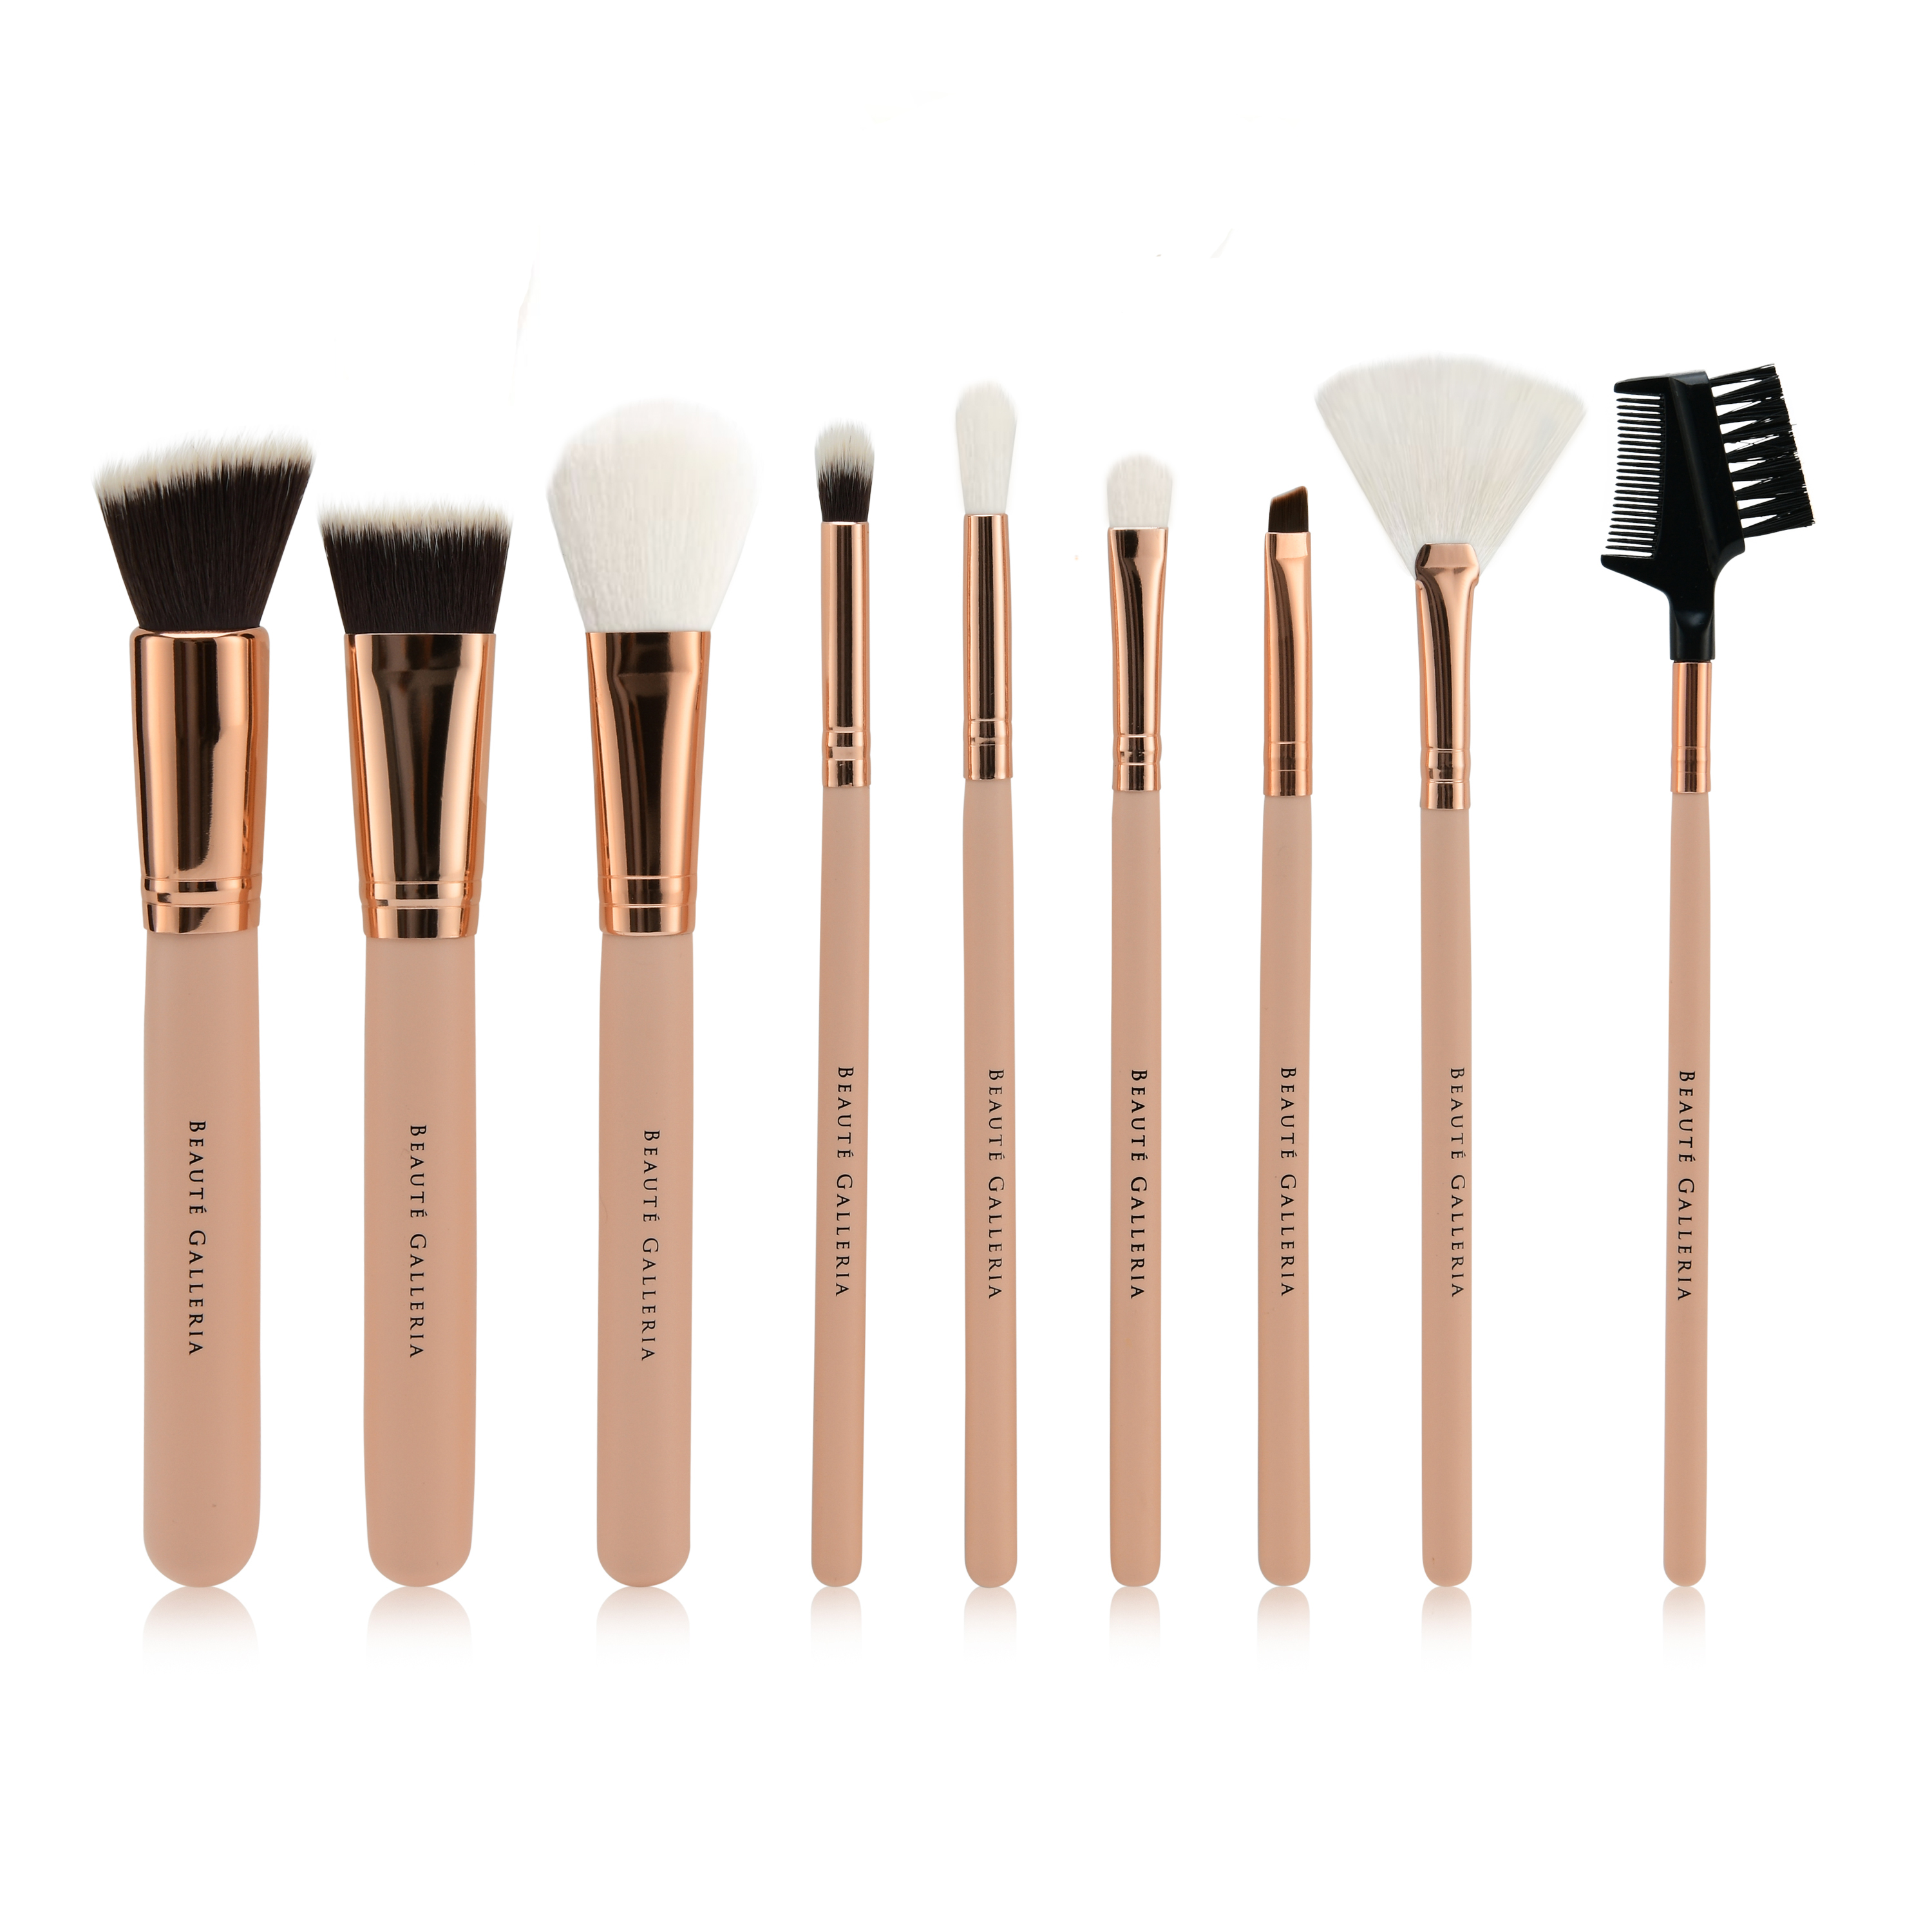 Beaute Galleria Makeup Brush Set, Vegan Cruelty-Free Synthetic Bristles with Travel Pouch Bag, 9 Pieces - image 2 of 8